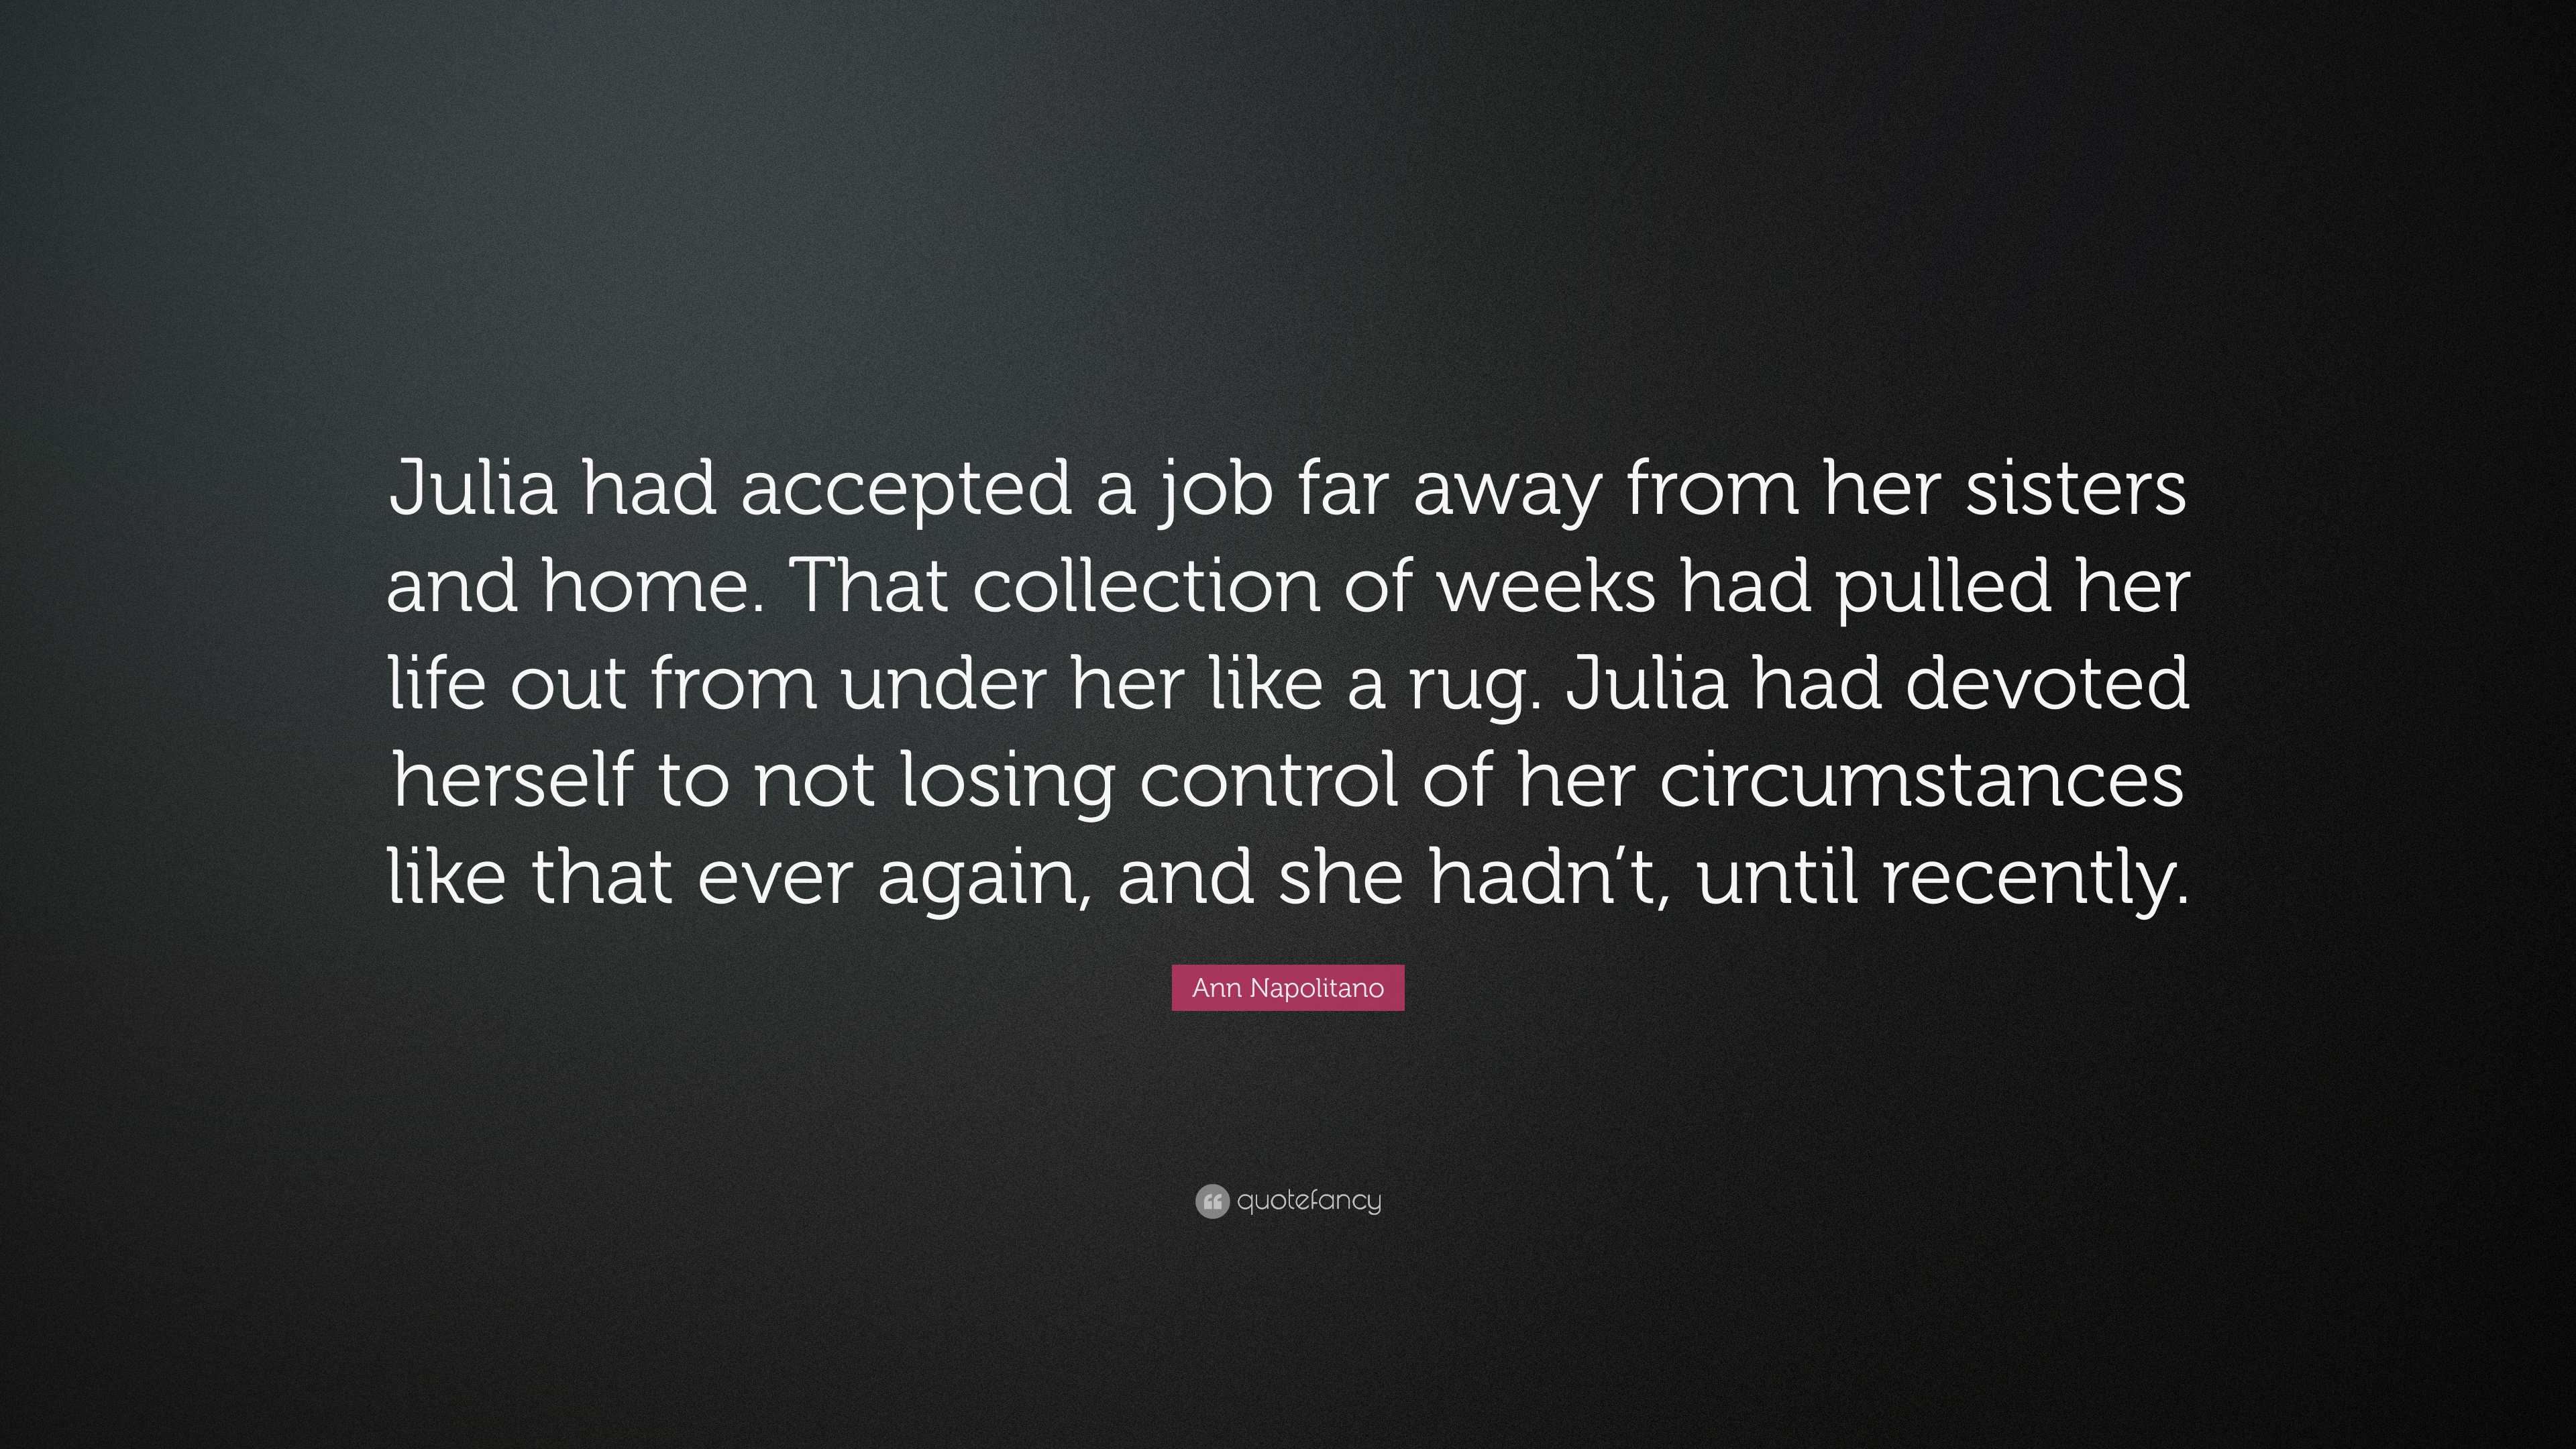 Ann Napolitano Quote: “Julia had accepted a job far away from her ...